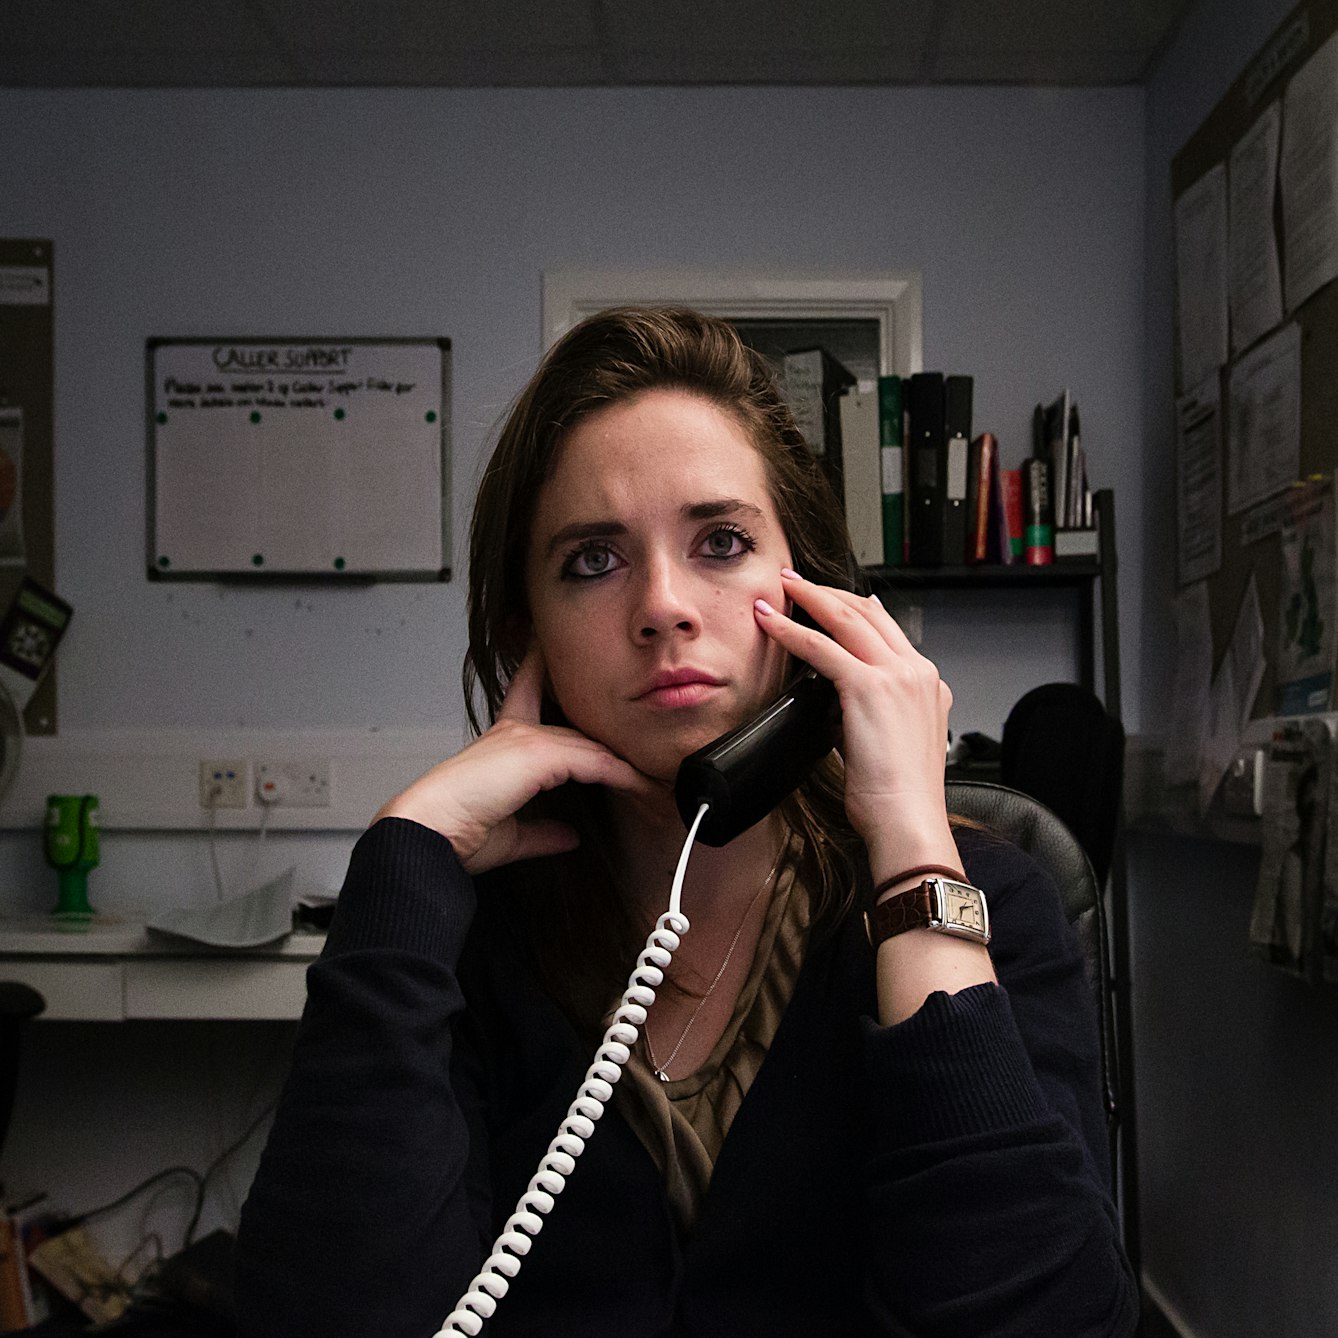 Photograph of a woman sat in an office environment. She is holding a landline telephone receiver to her left ear and is looking into the distance over the top of the camera.